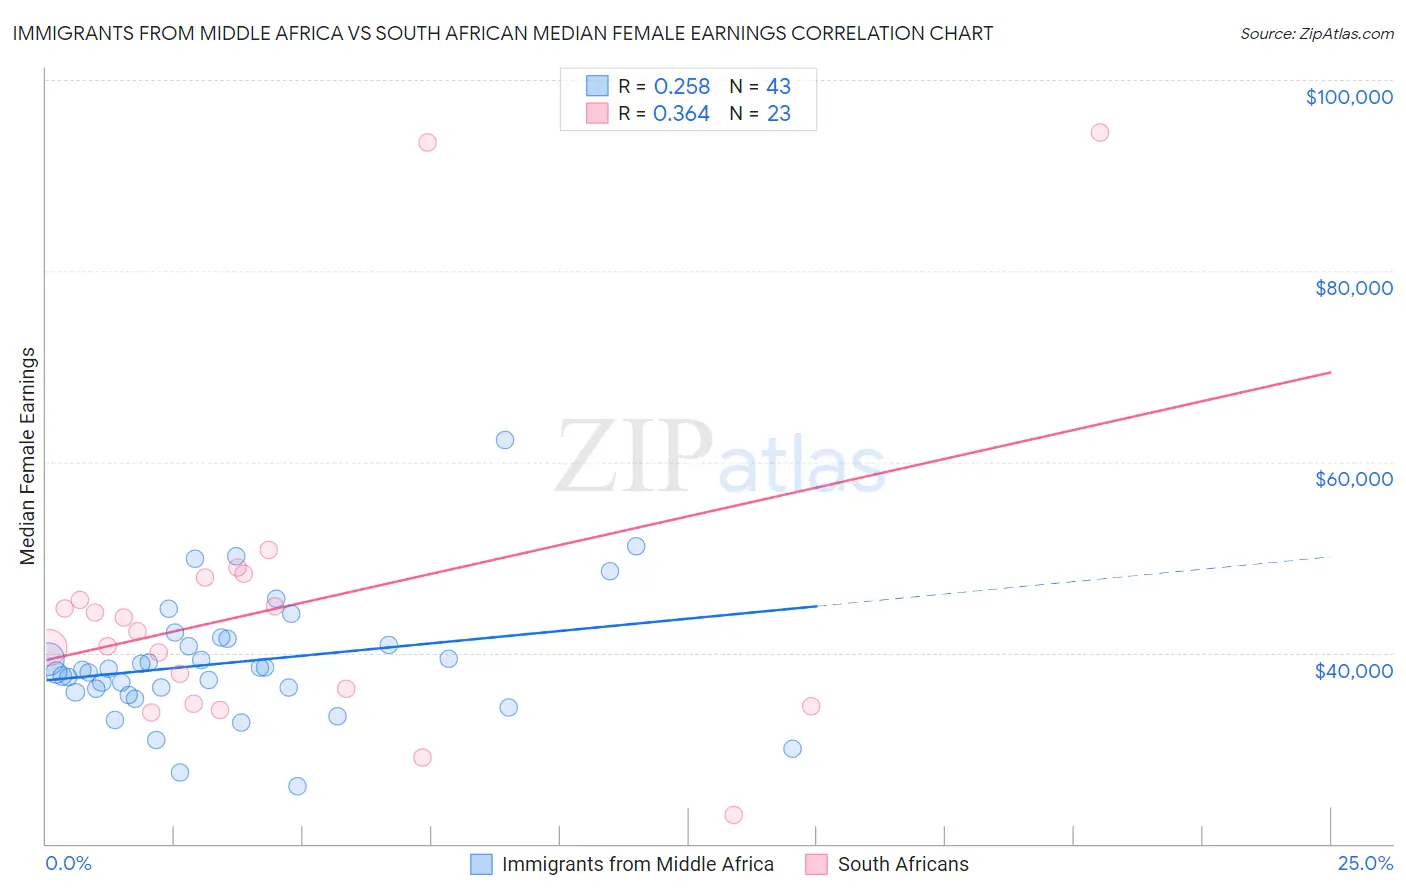 Immigrants from Middle Africa vs South African Median Female Earnings